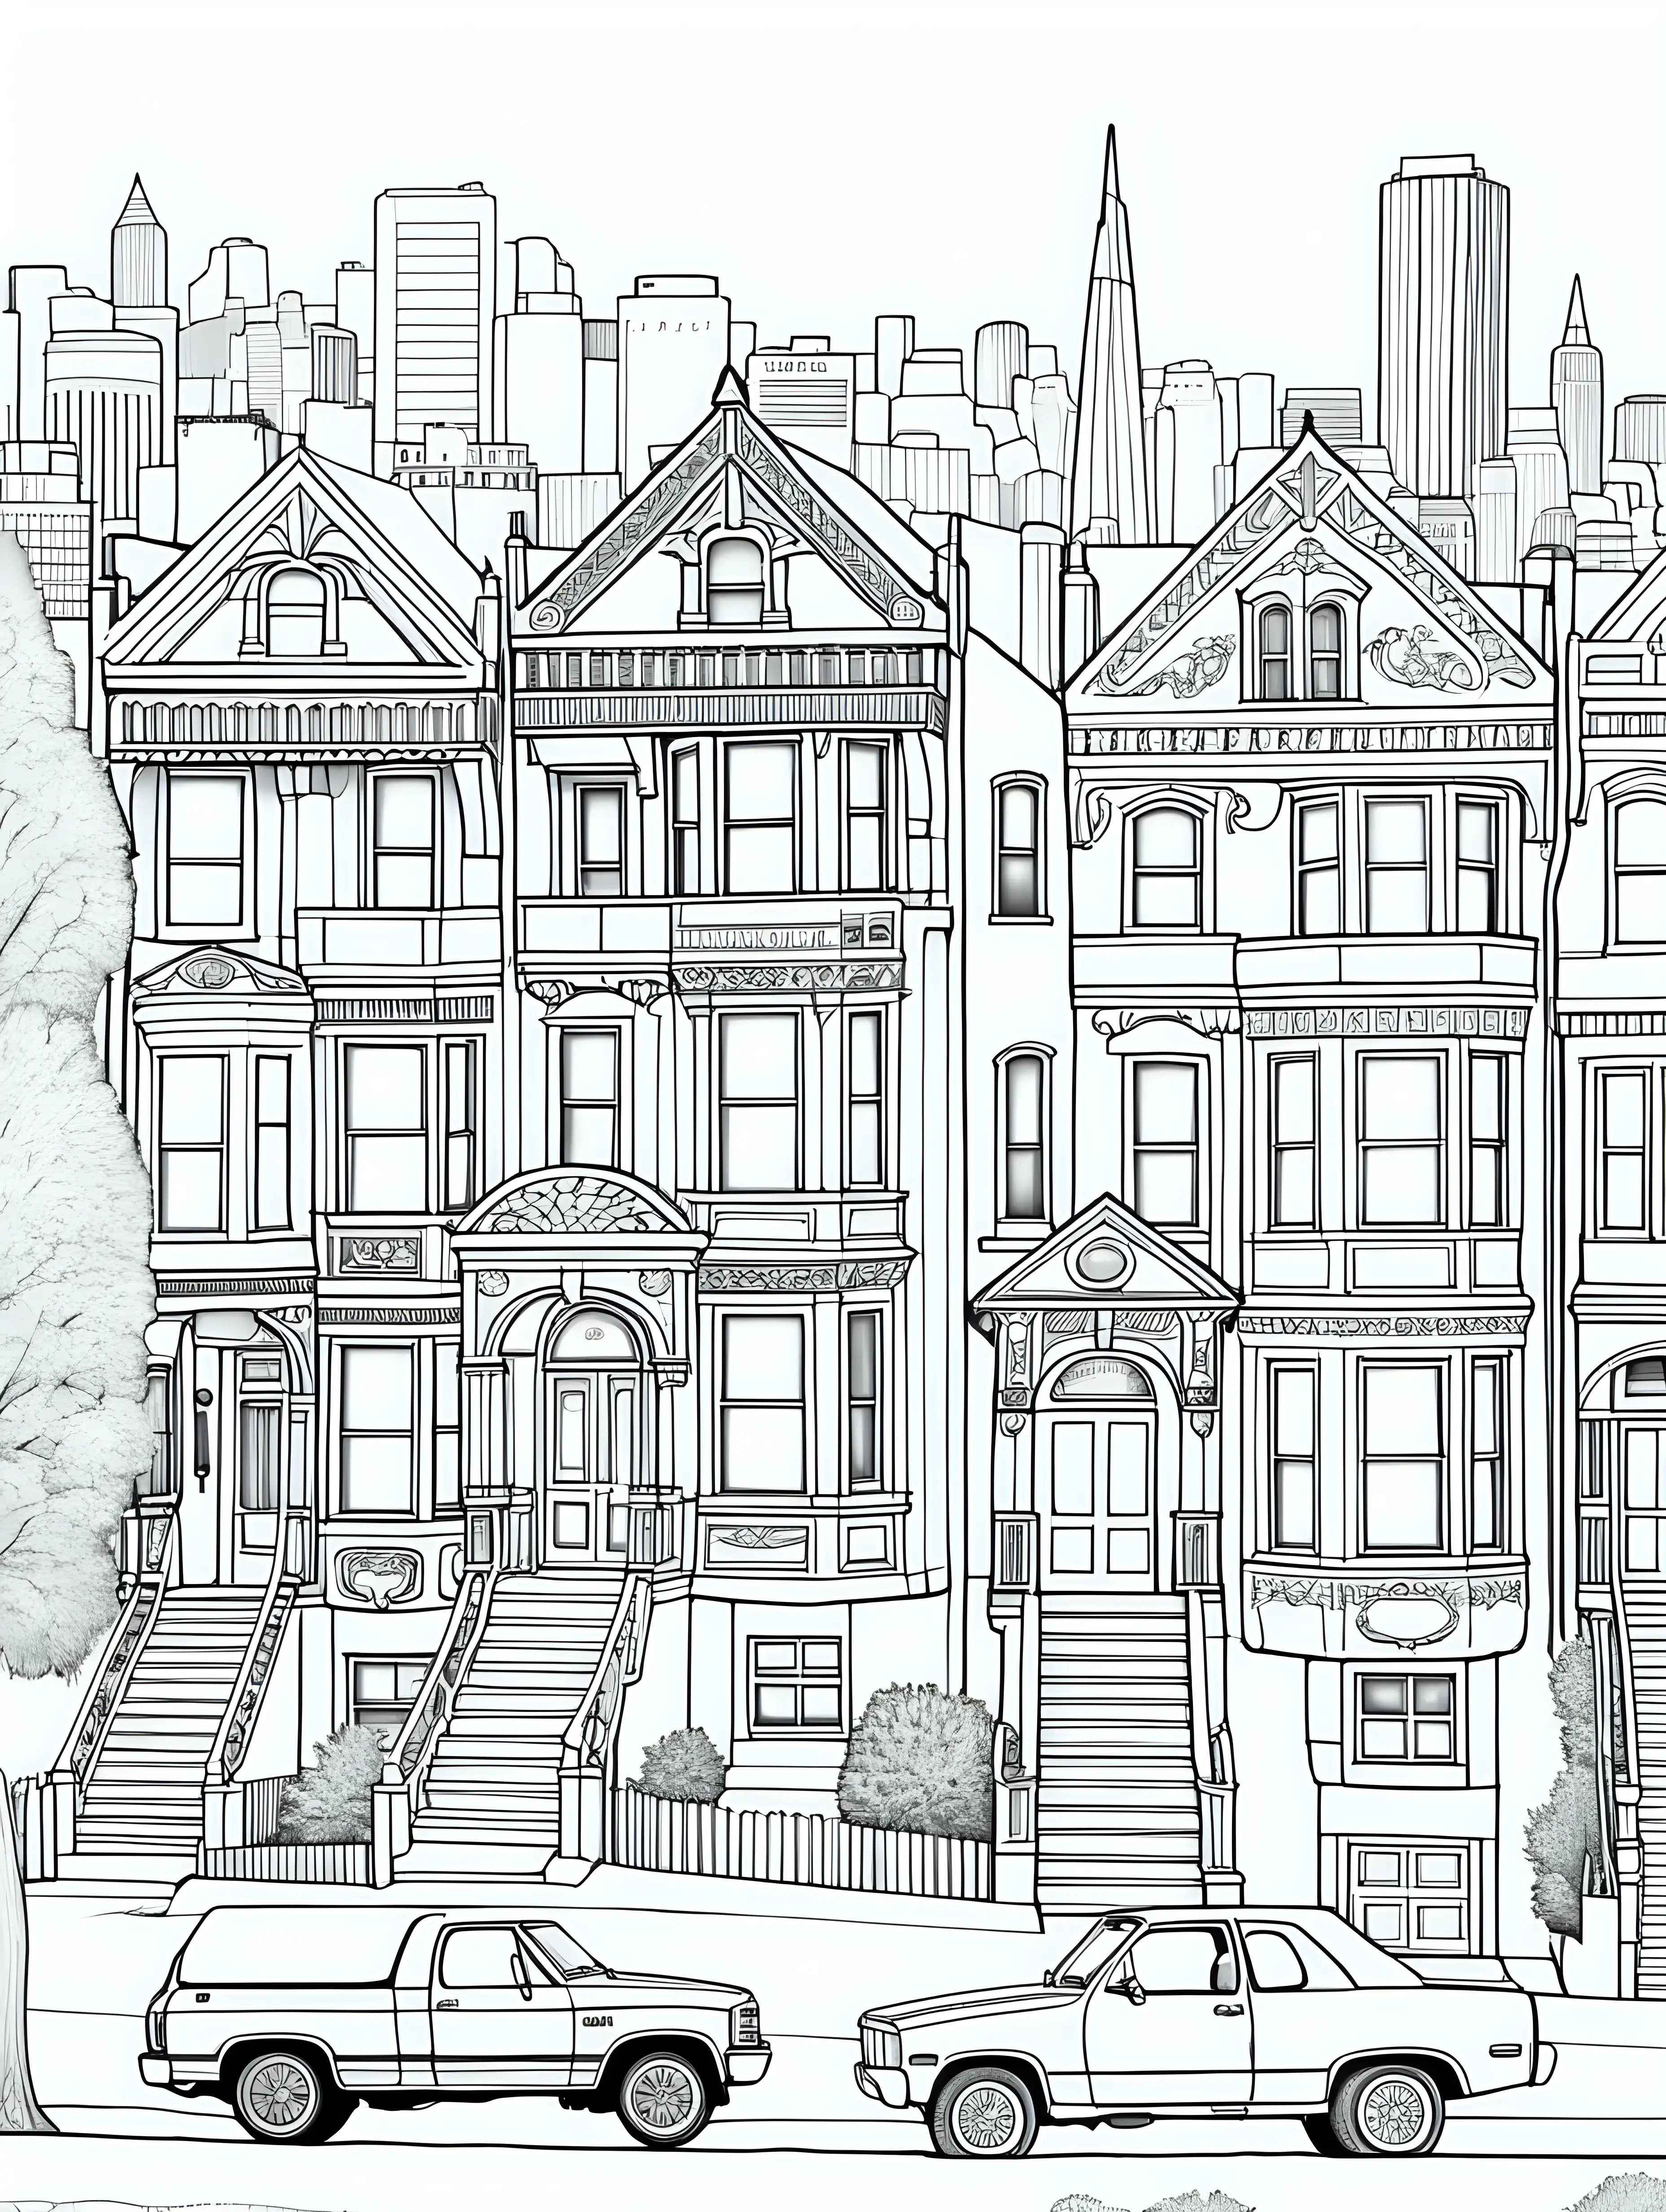 A Coloring book page, San francisco painted ladies style townhouses, should be on a hill, have other fun elements outside such as trees, cars. place emphasis on surrounding scene, sky, etc, The lines should be simple, suitable for younger colorists.